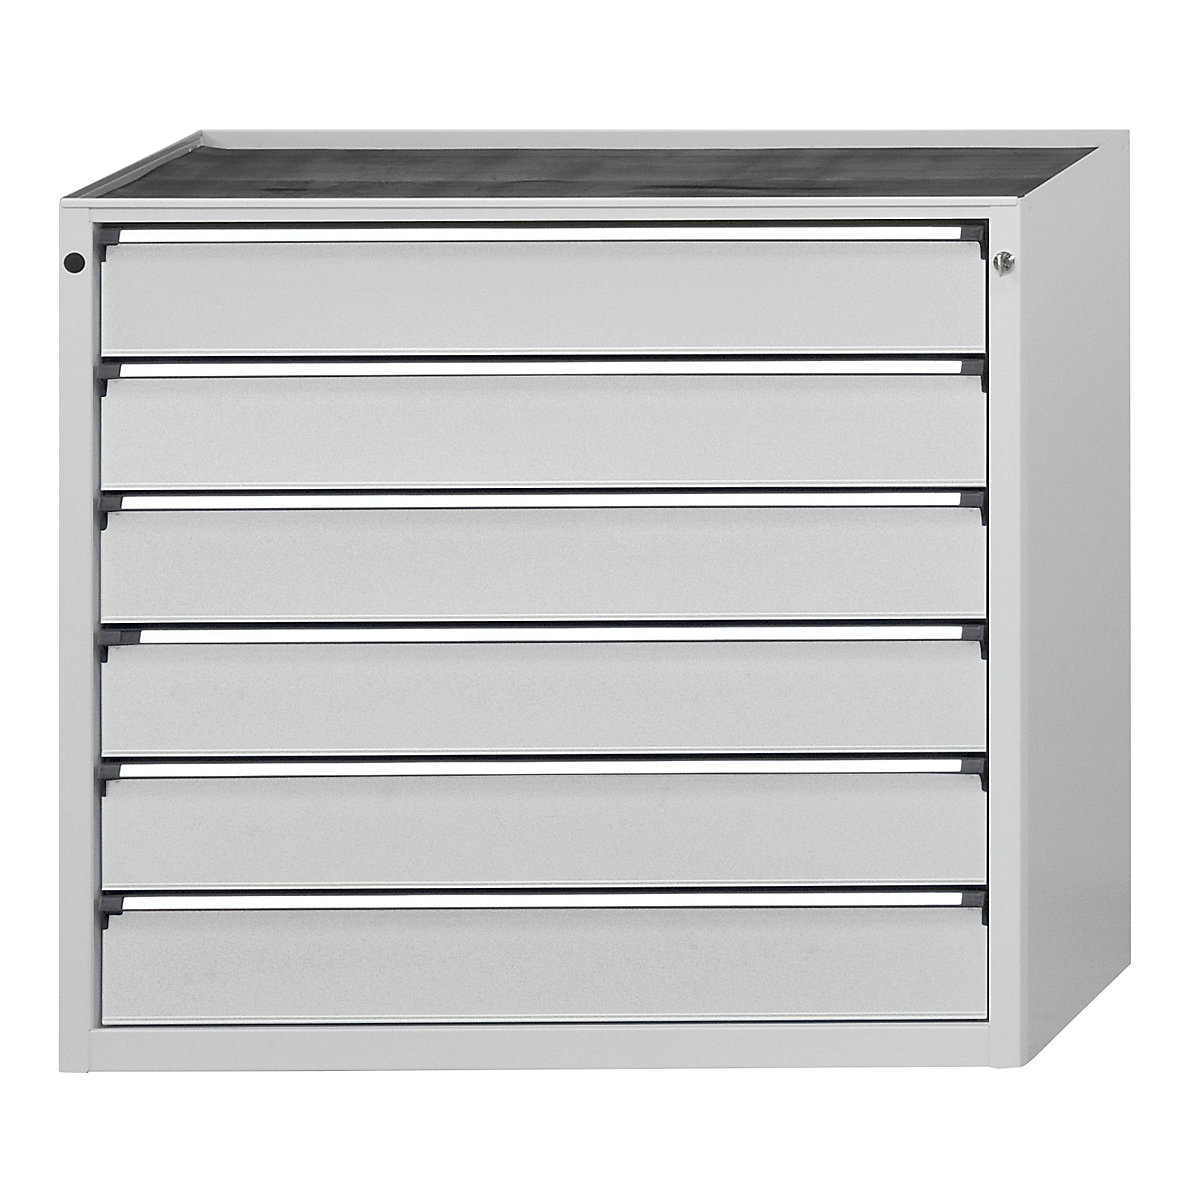 Drawer cupboard without worktop – ANKE, width 1060 mm, max. drawer load 200 kg, 6 x 150 mm drawers, front in light grey-2